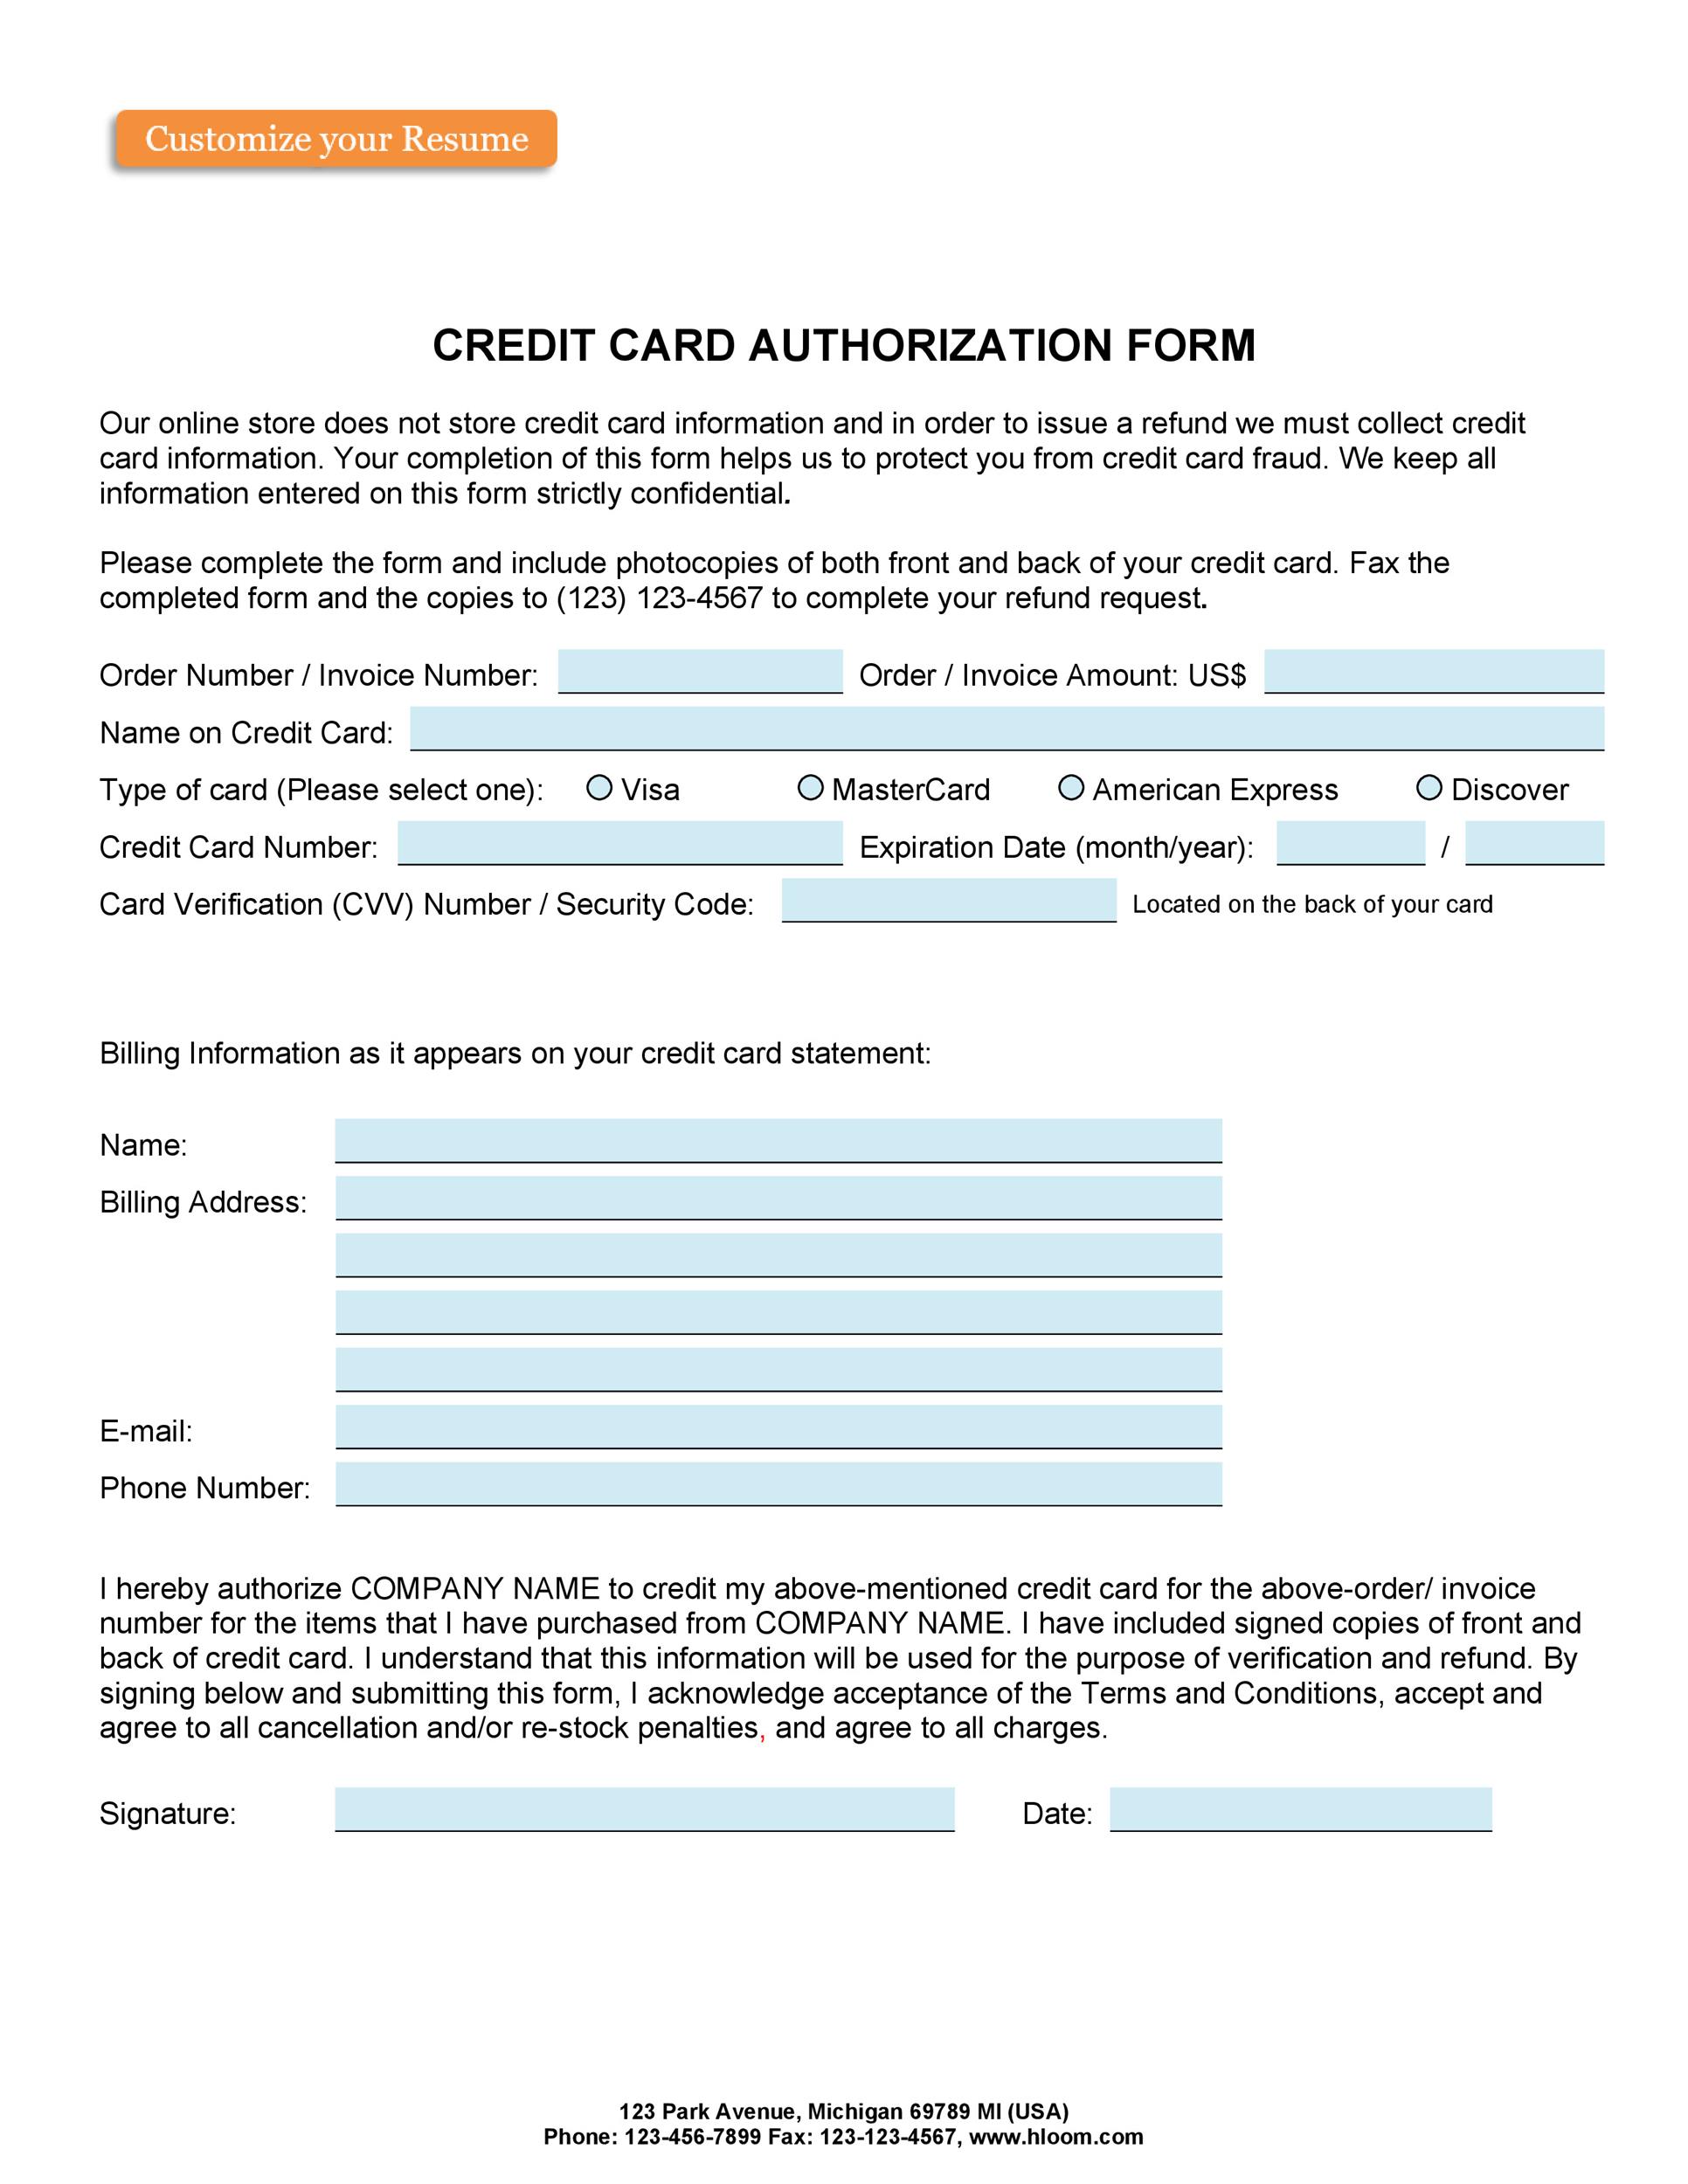 Free credit card authorization form template 20